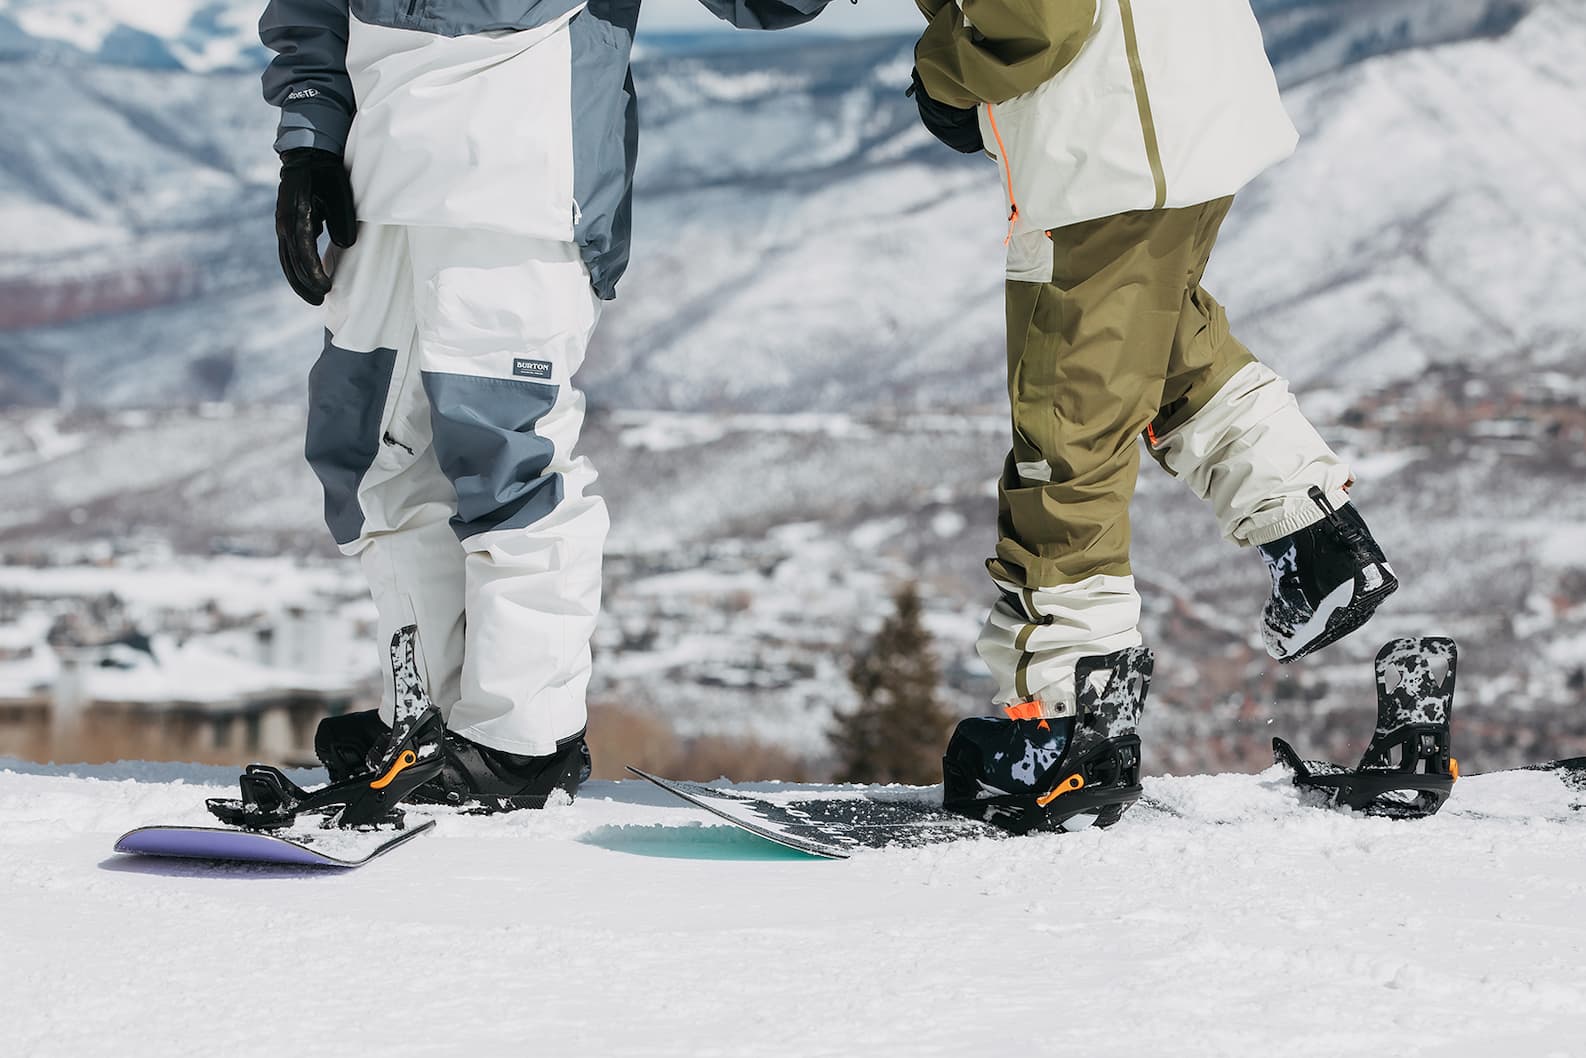 pick Nomination Festival Burton Step On® Bindings: Everything You Need to Know | Burton Snowboards